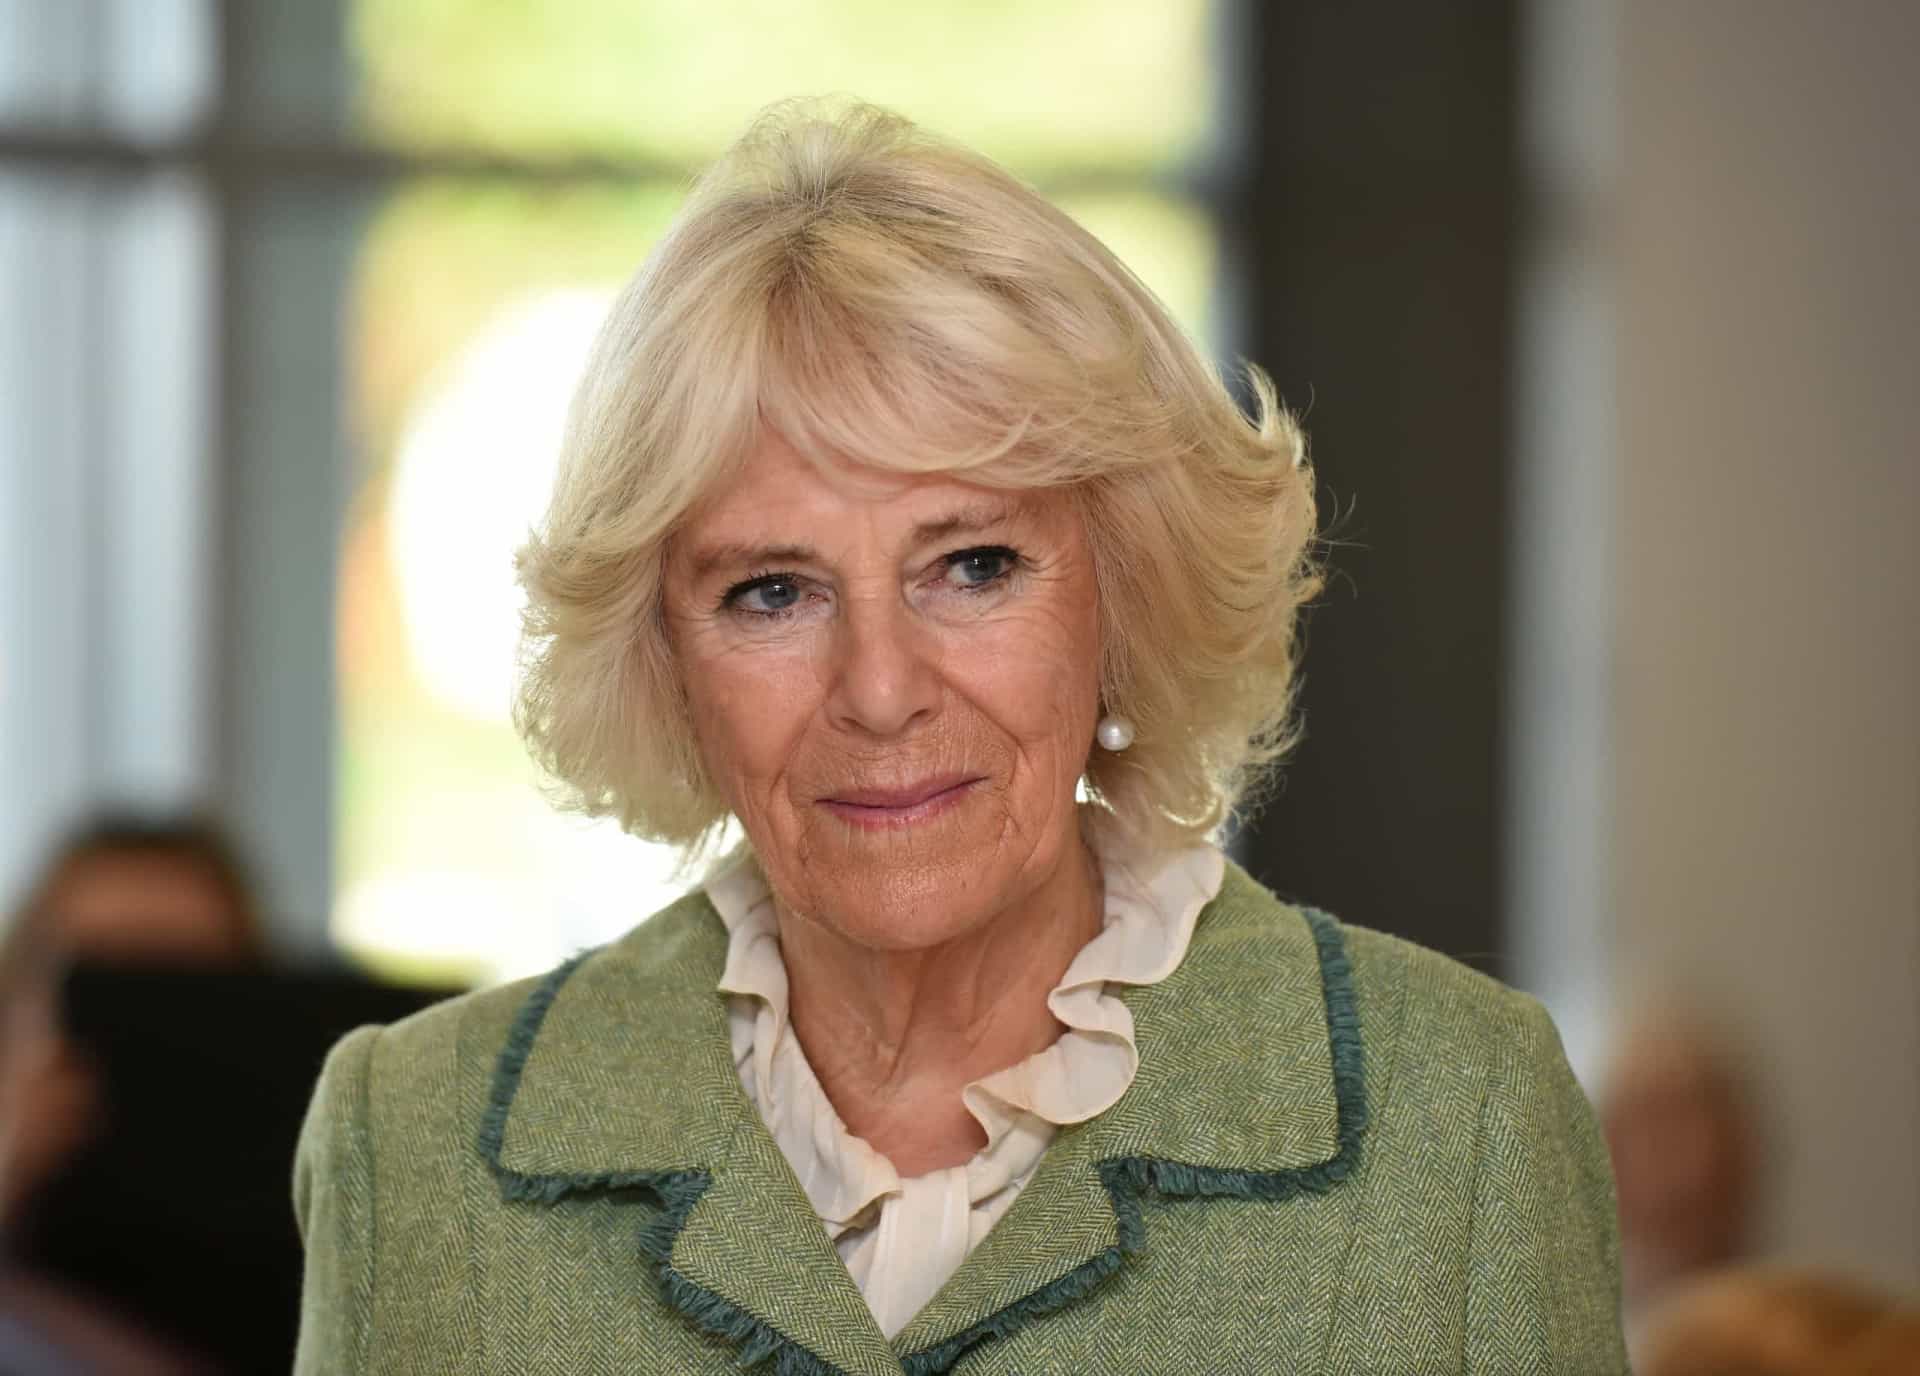 <p>Camilla, Duchess of Cornwall technically had the title Princess of Wales from her marriage to Prince Charles until his accession to the throne.</p><p>You may also like:<a href="https://www.starsinsider.com/n/497906?utm_source=msn.com&utm_medium=display&utm_campaign=referral_description&utm_content=517522en-us"> Find out which type of drunk you are based on your zodiac sign</a></p>